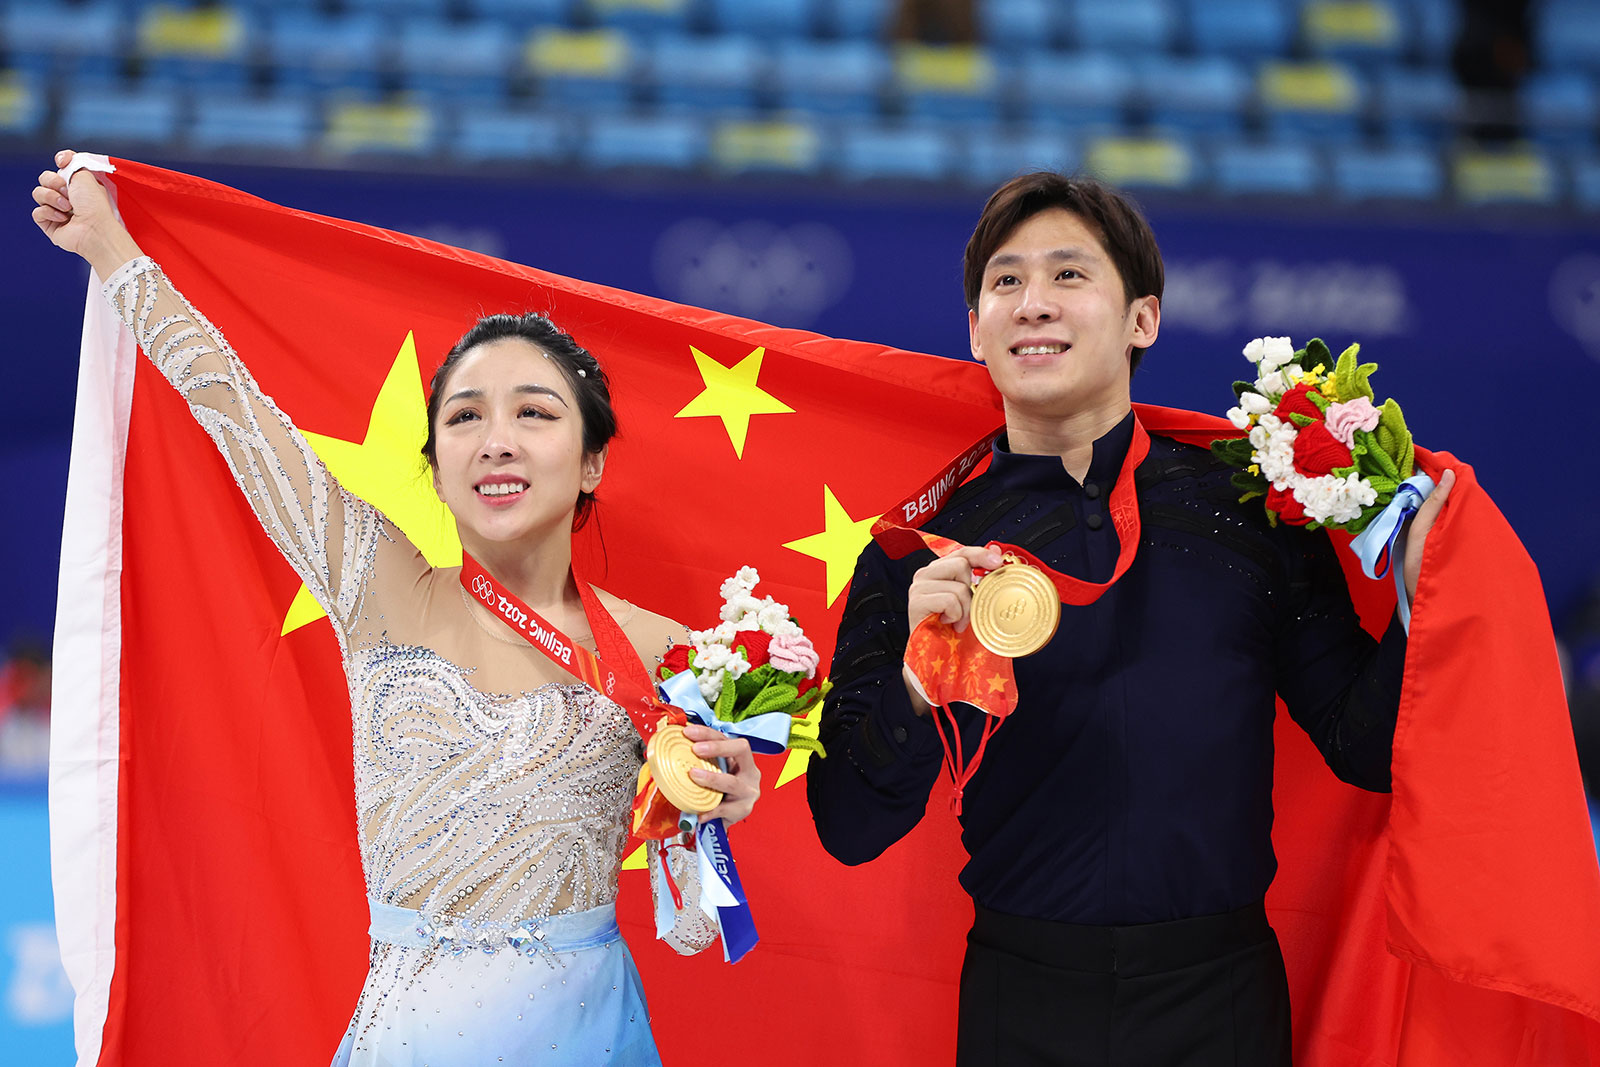 Chinese skating duo Sui Wenjing and Han Cong pose during the medal ceremony following the pairs free skating event on February 19.